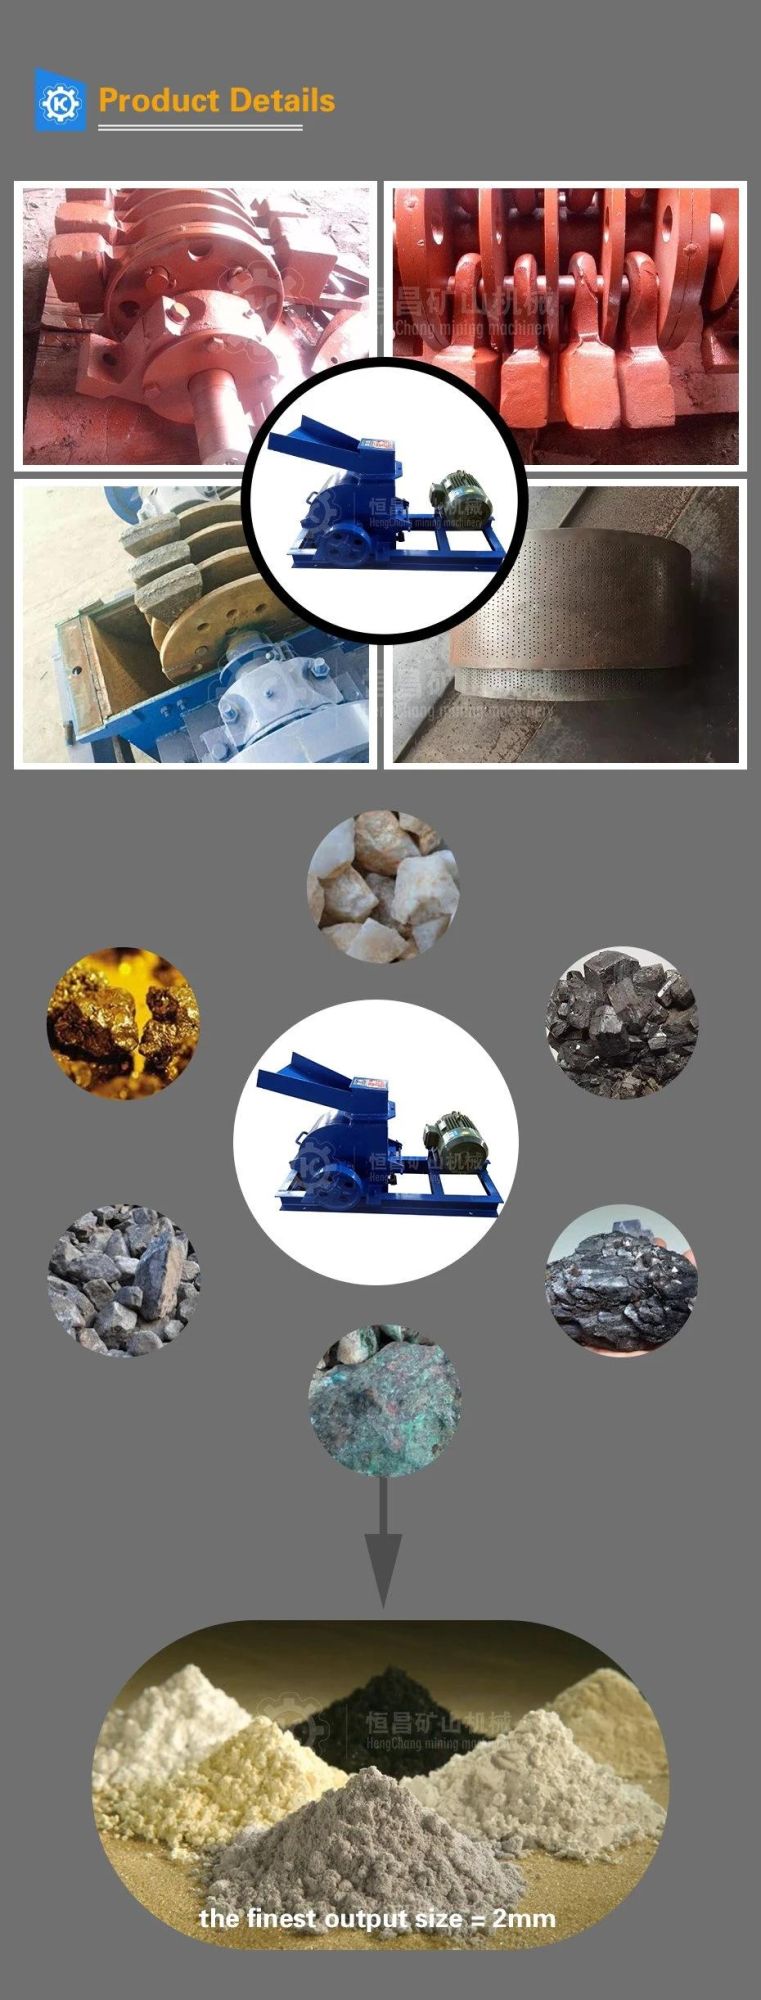 Diesel Powered Rock Crusher Hammer Mill Crushing and Grinding Gold Ore